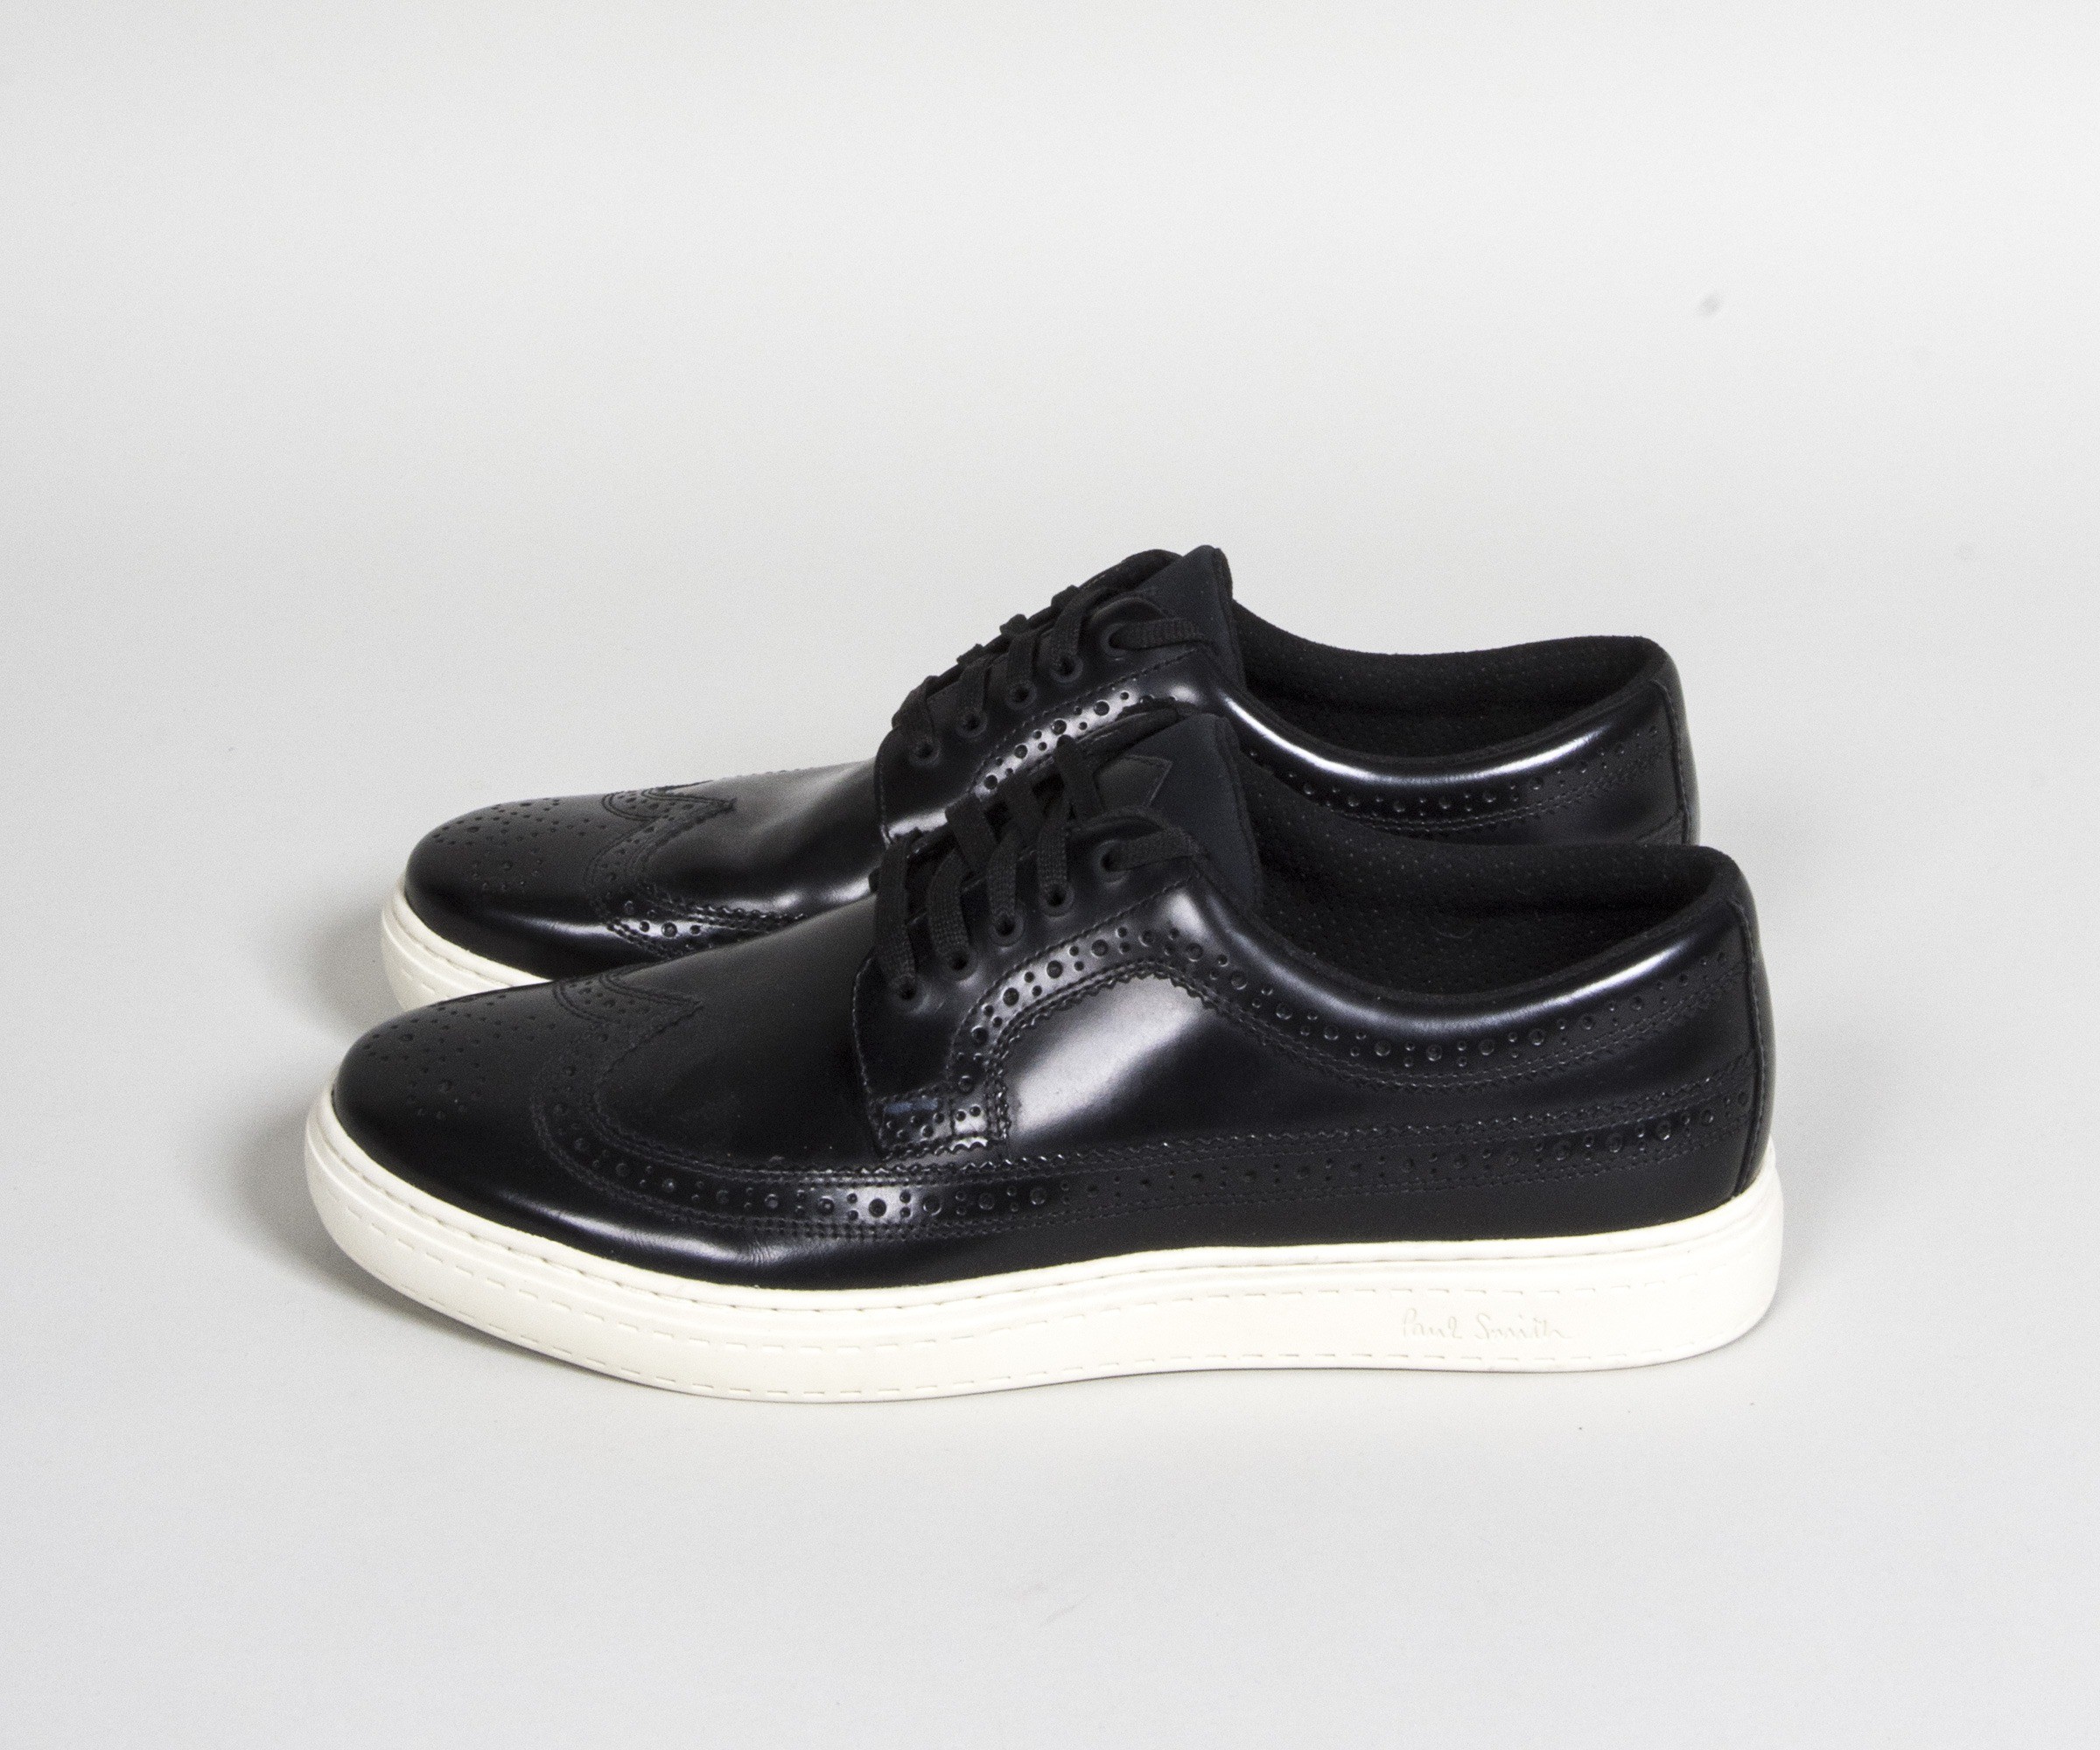 Paul Smith Shoes Merced Brogue Style Sneaker Black